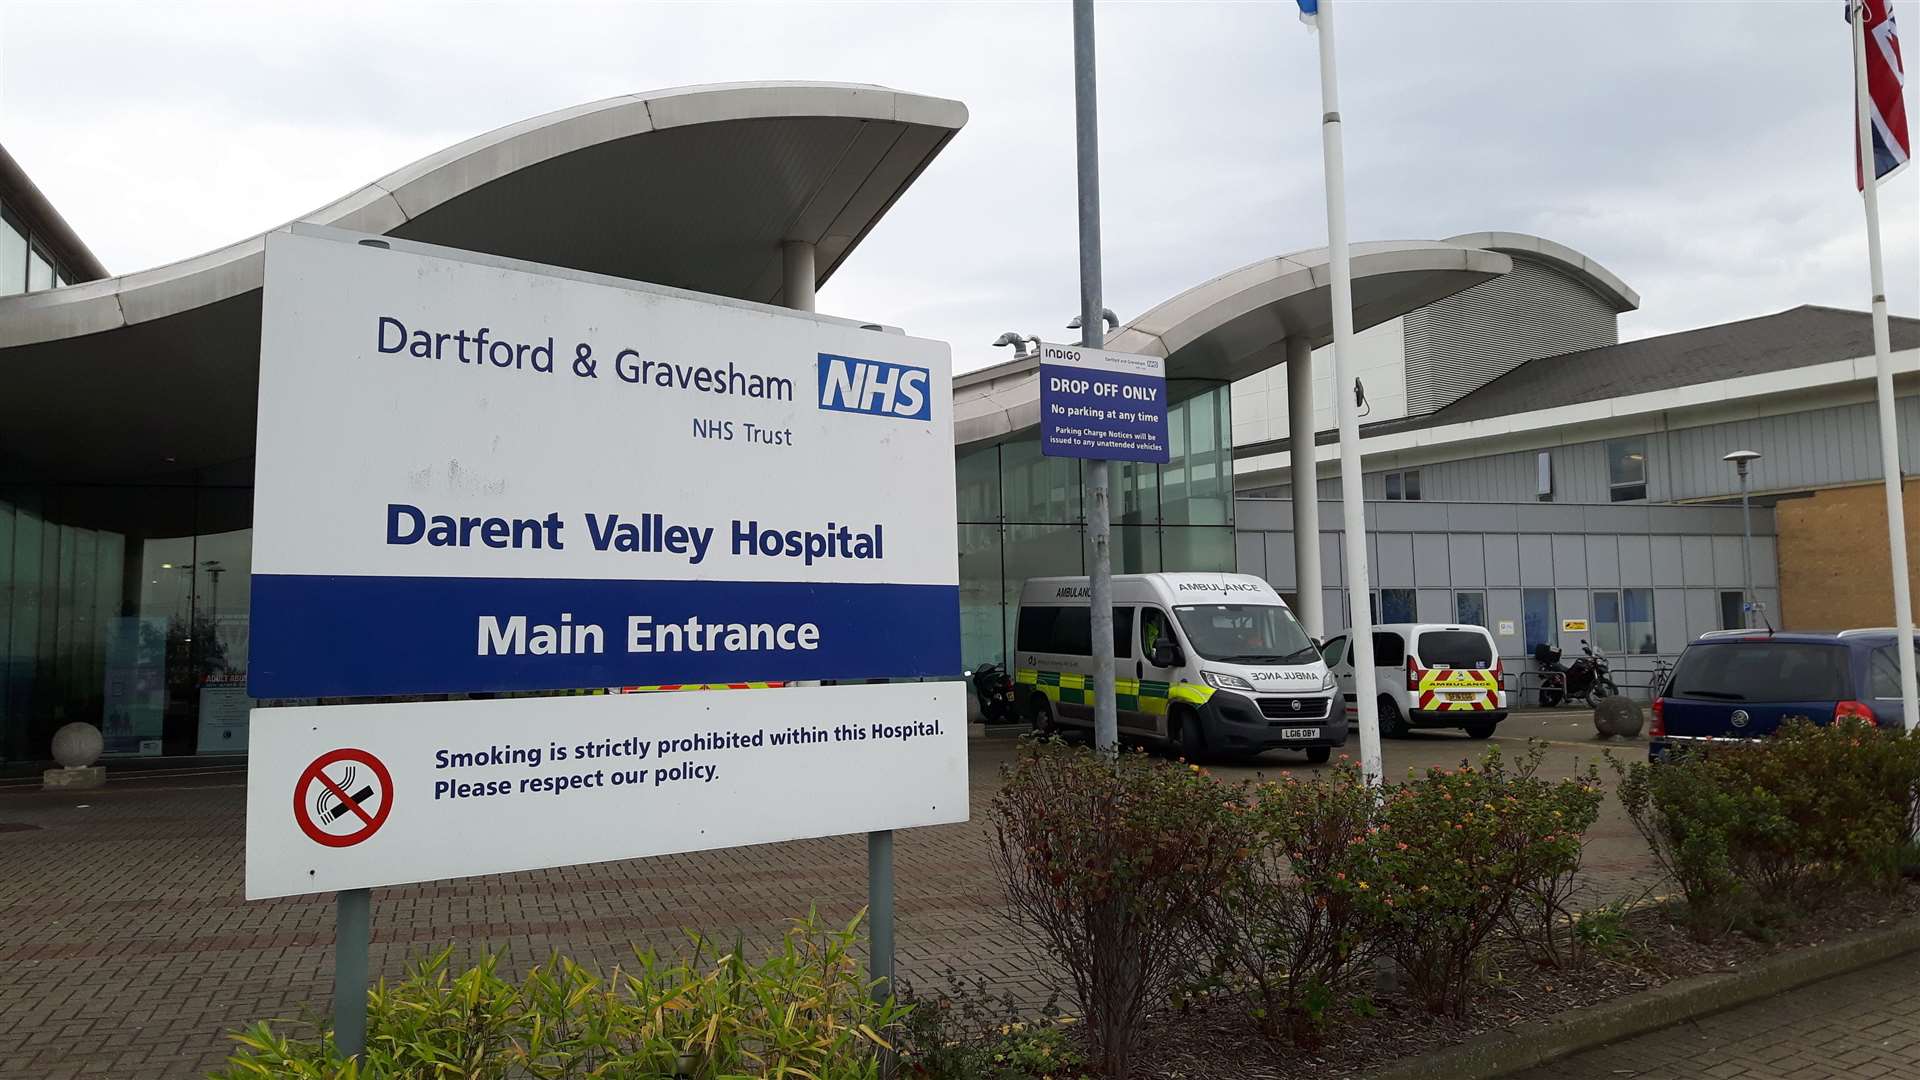 Darent Valley Hospital in Dartford is the other site currently proposed.